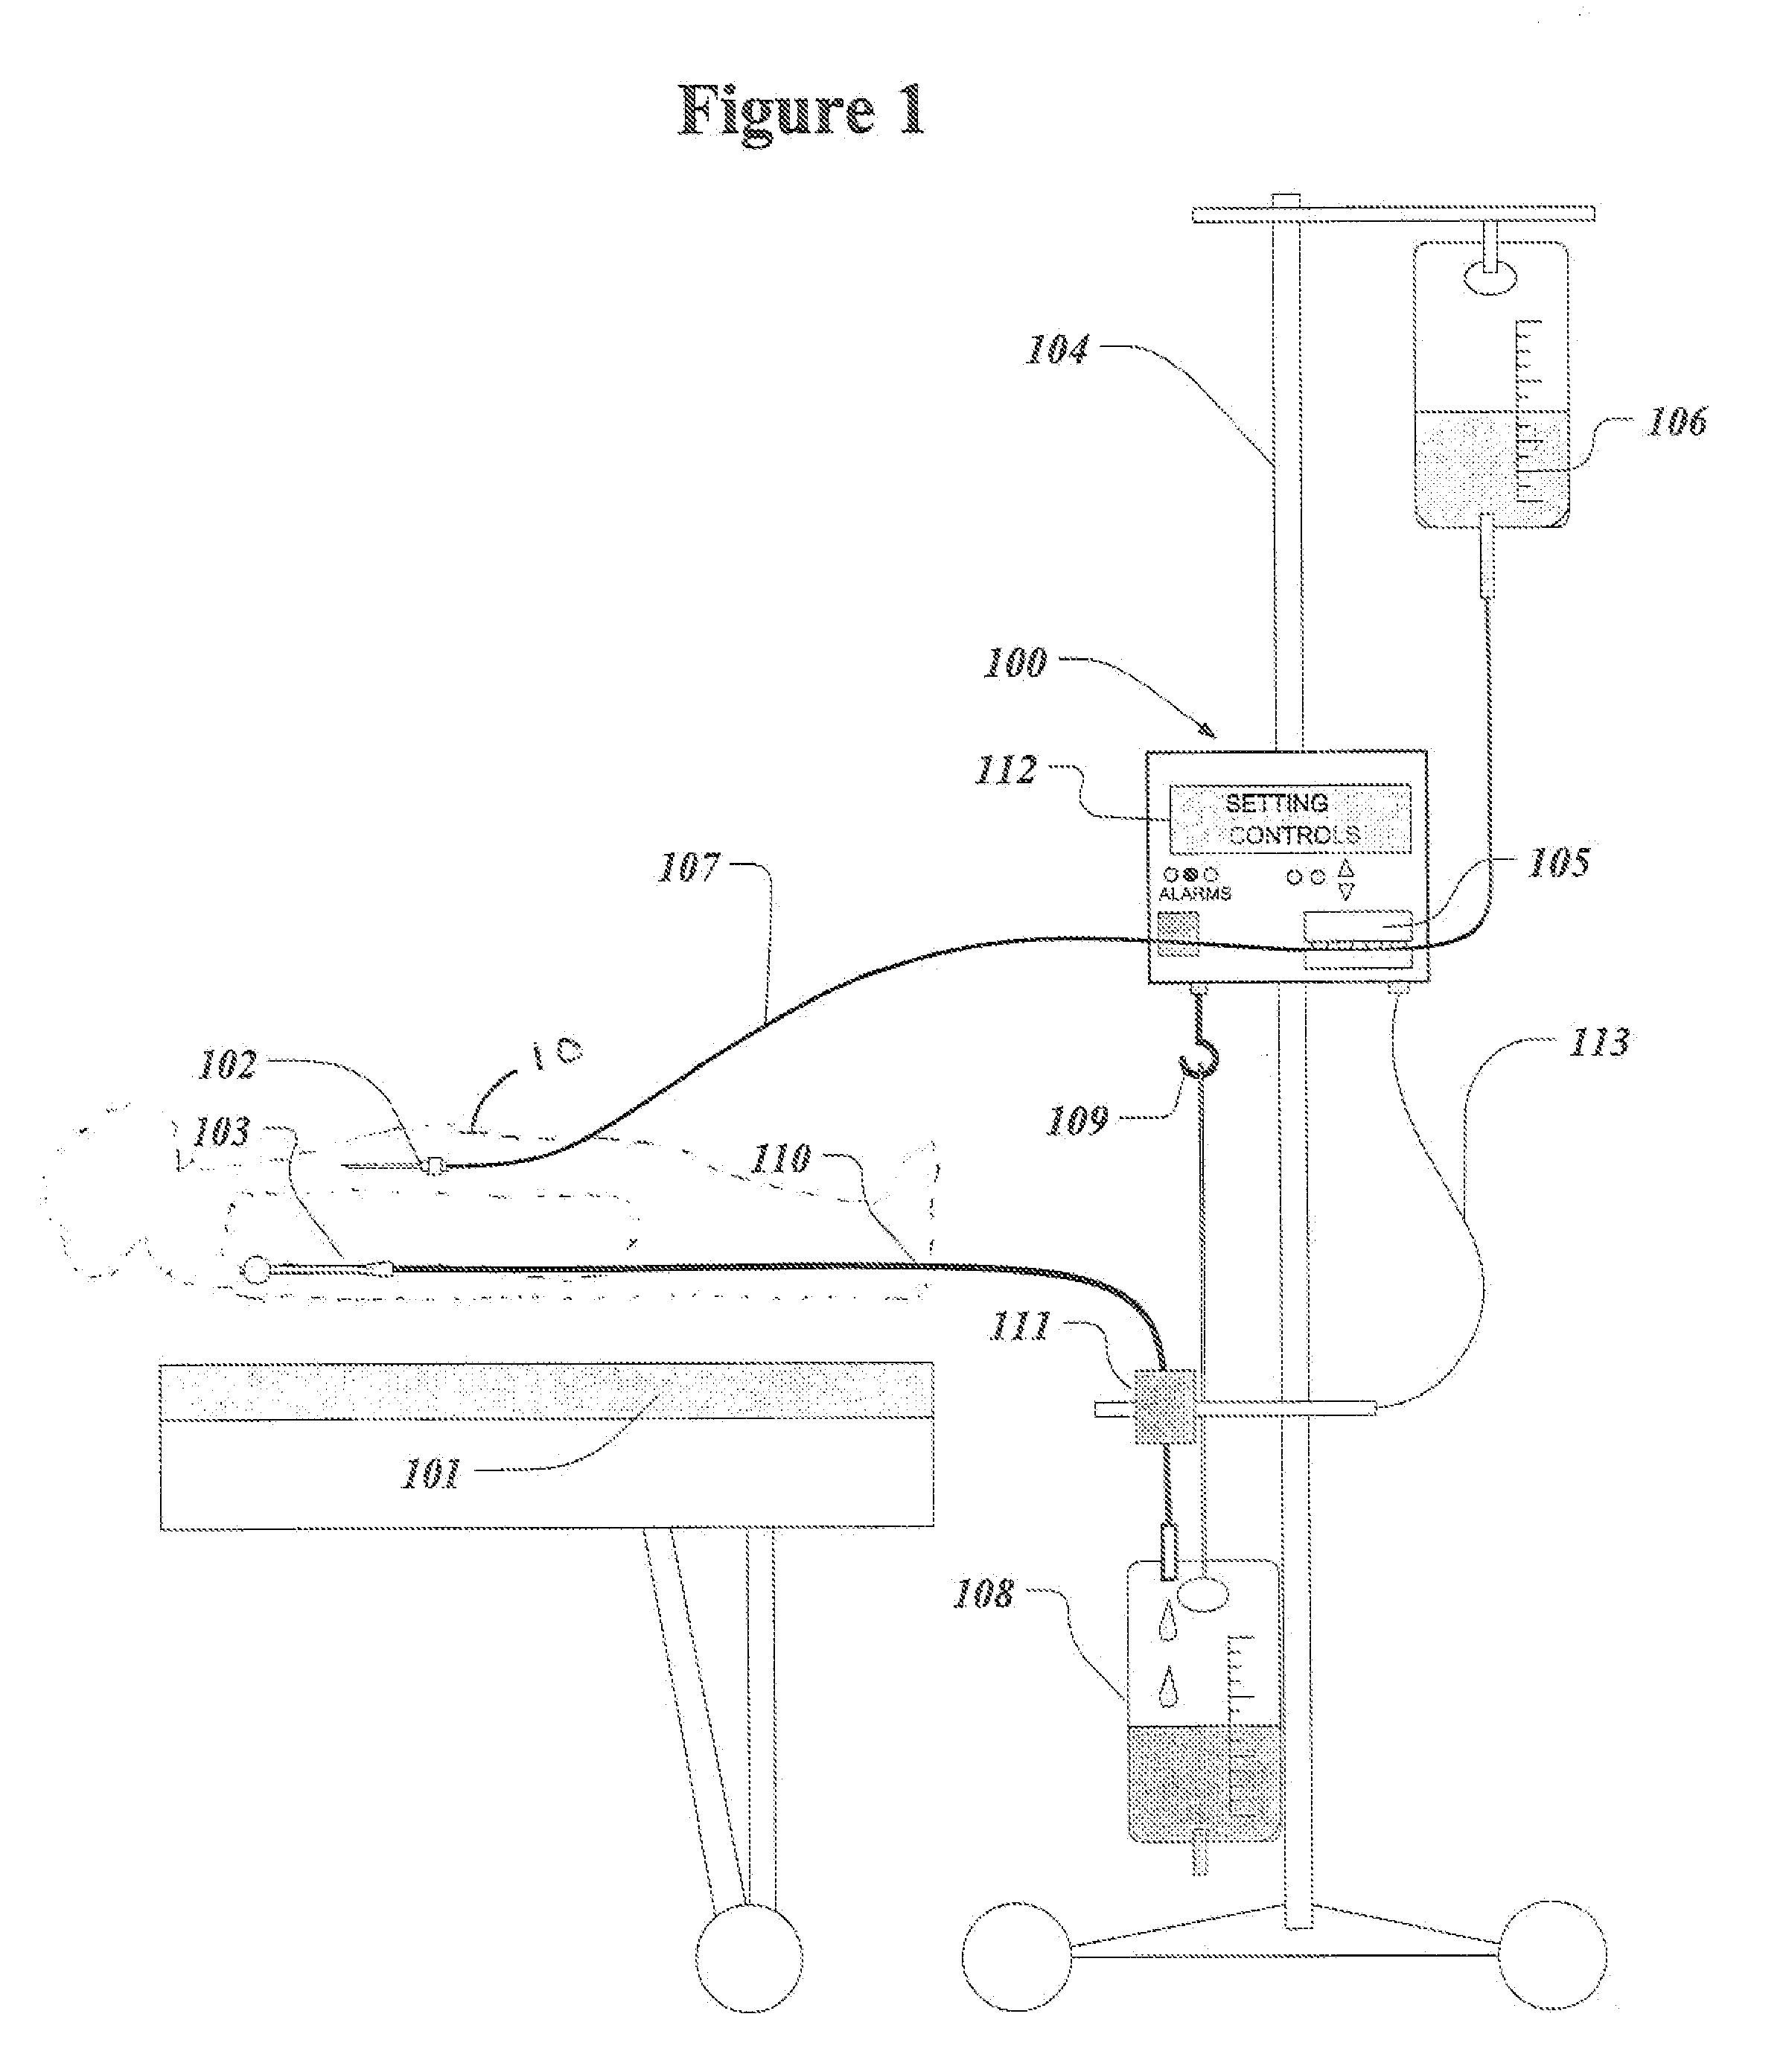 Method and system for infusing an osmotic solute into a patient and providing feedback control of the infusing rate